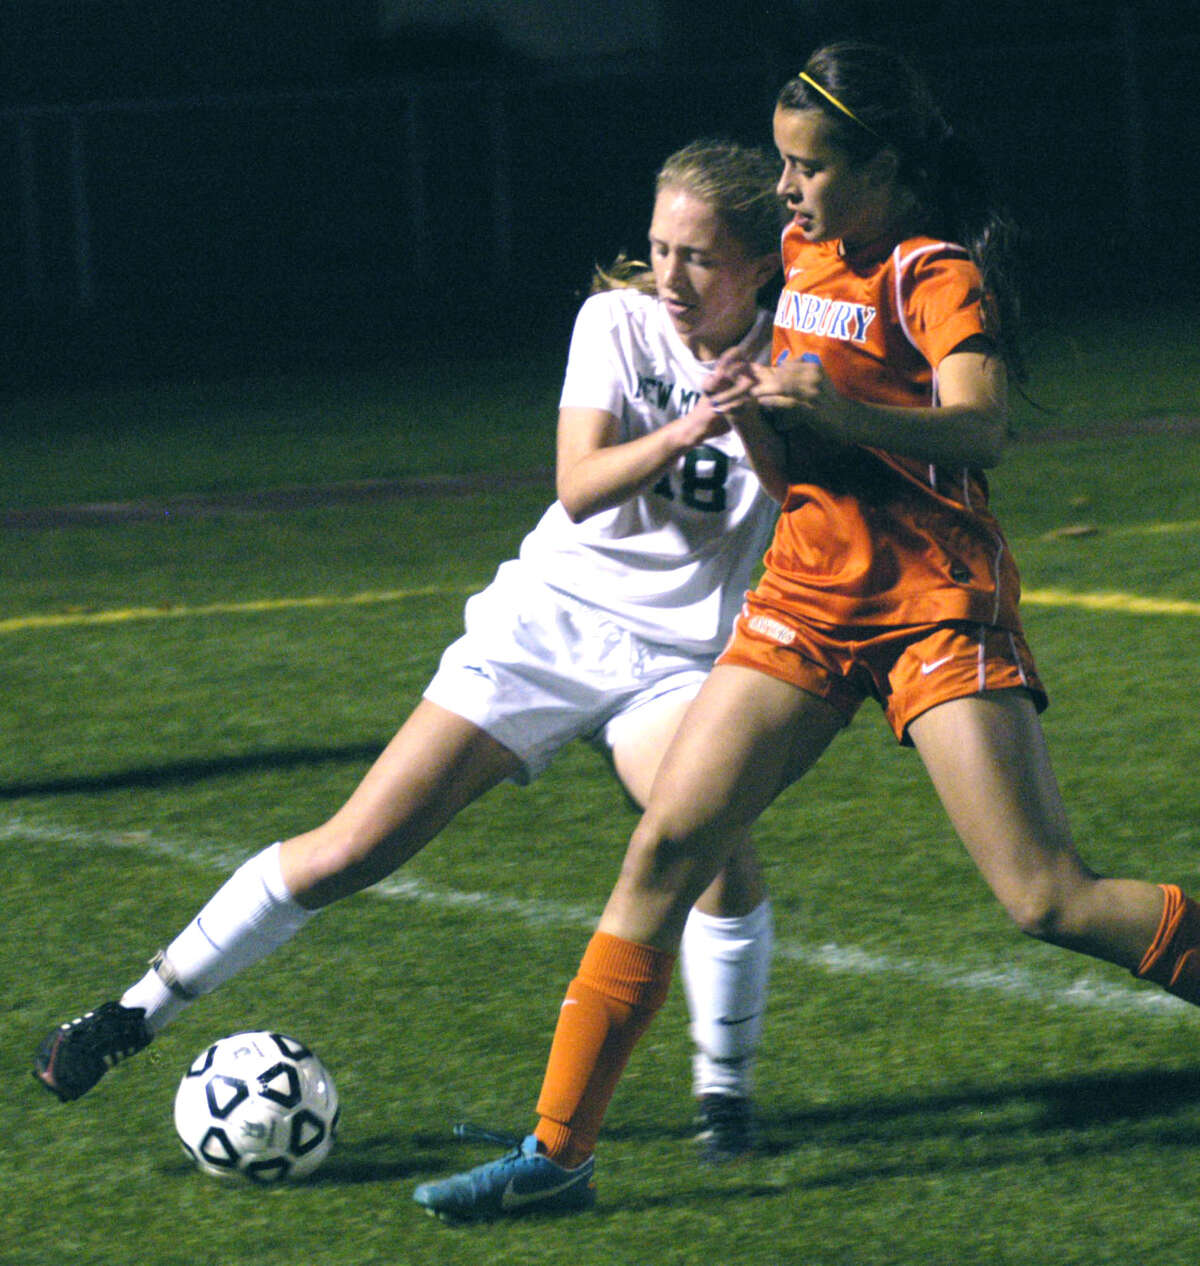 Helen Bayers of the Green Wave battles a Danbury player for possession deep in New Milford territory during Wednesday's state tournament match at NMHS. Nov. 6, 2013